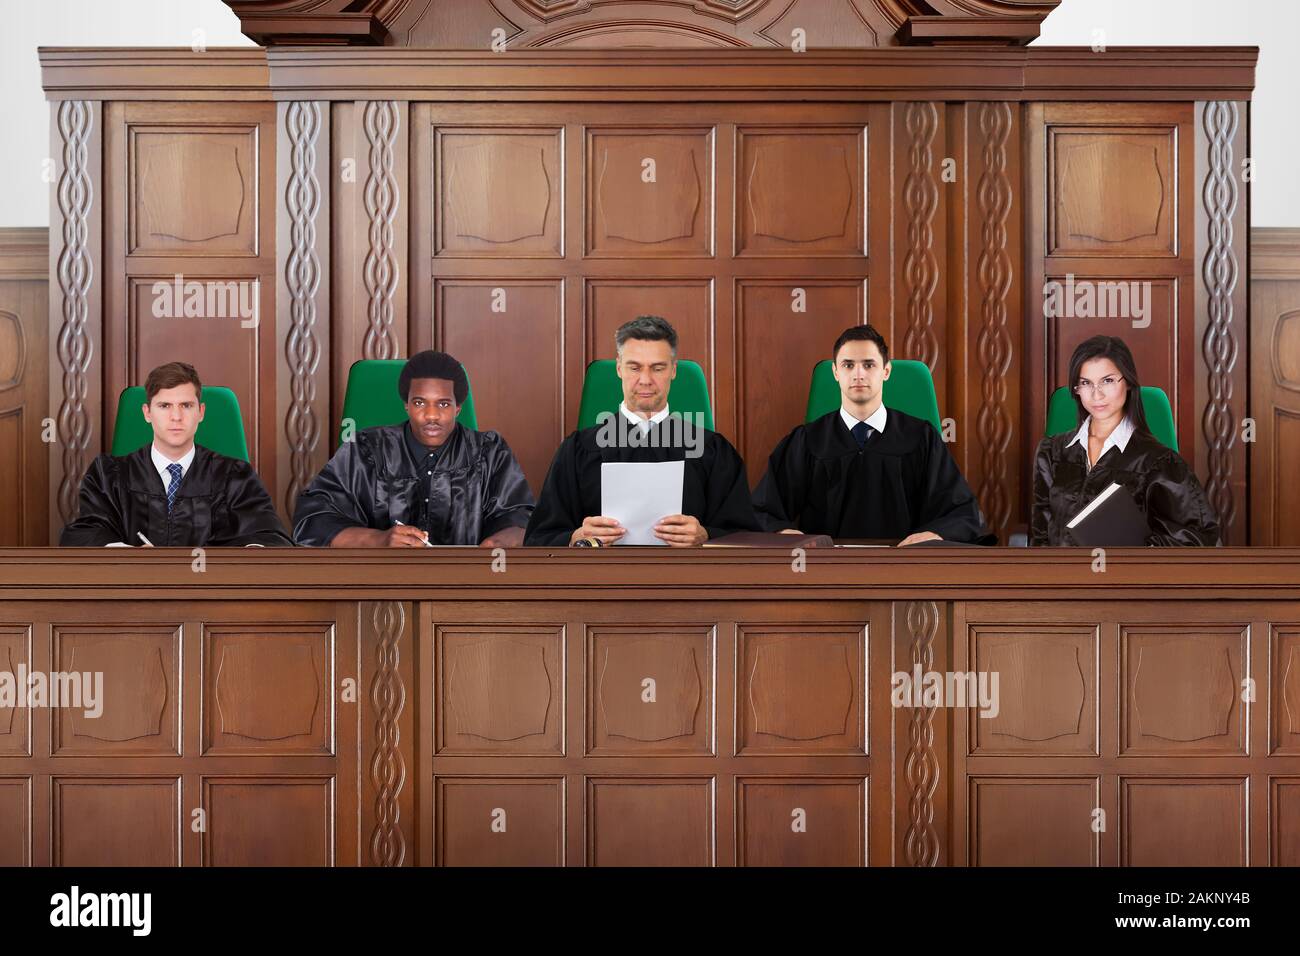 Judges Sitting In A Courtroom During Trial Hearings Stock Photo